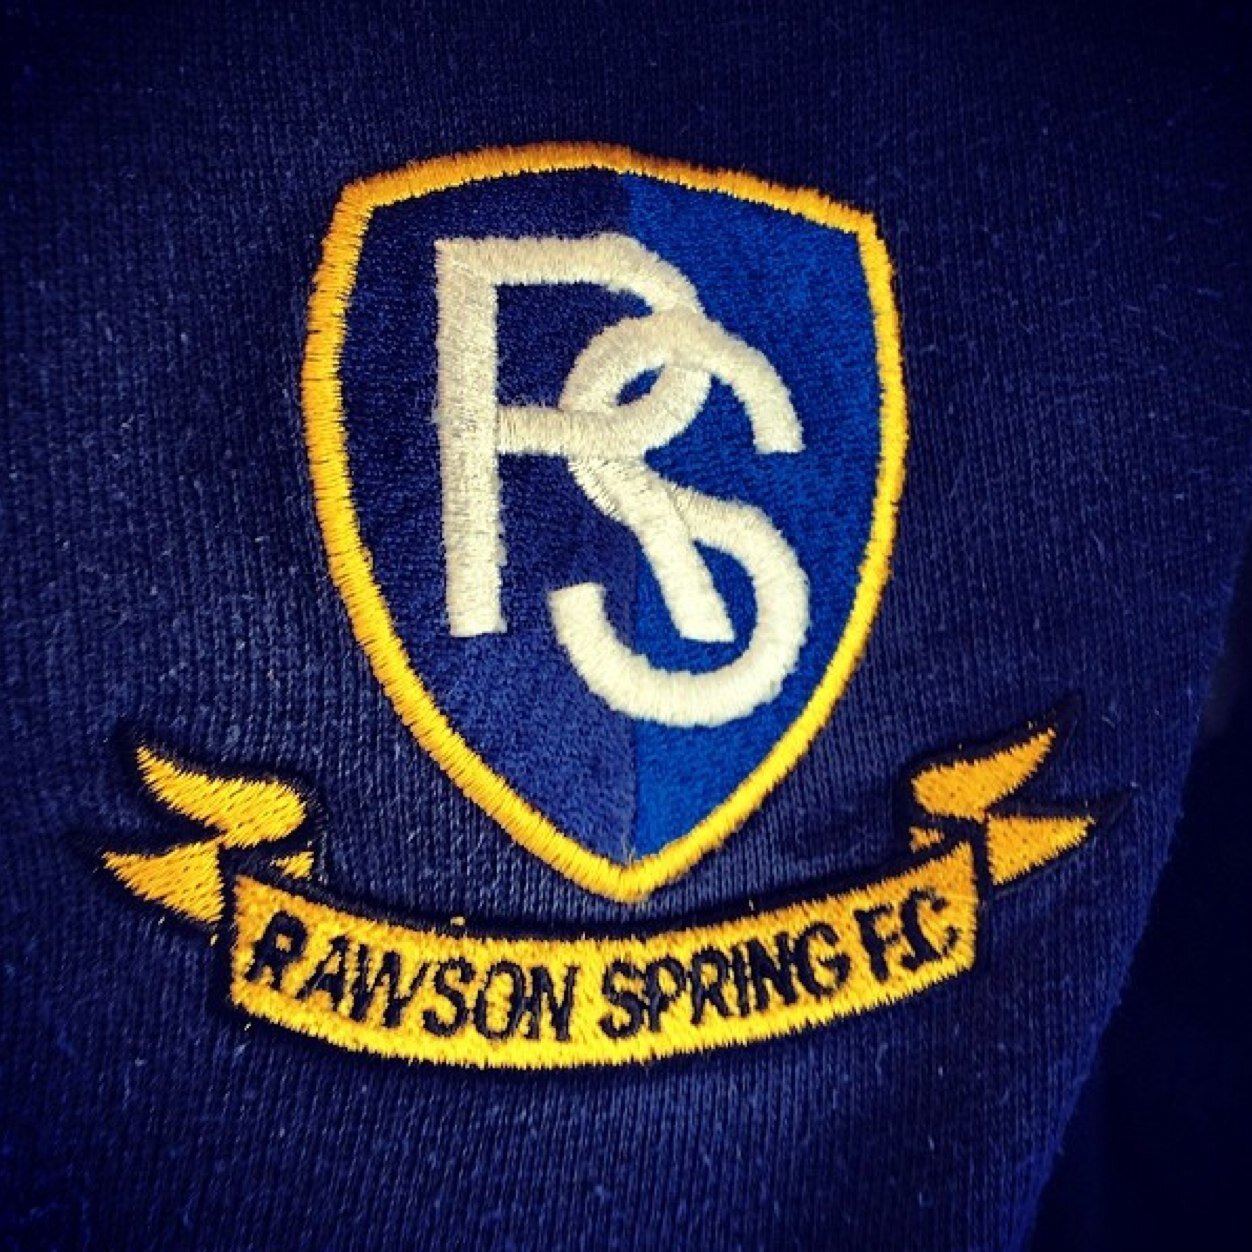 The Official Twitter Account of Rawson Spring Football Club.
World record holders of the fastest hat trick ever scored.
Current Senior Cup Champions!